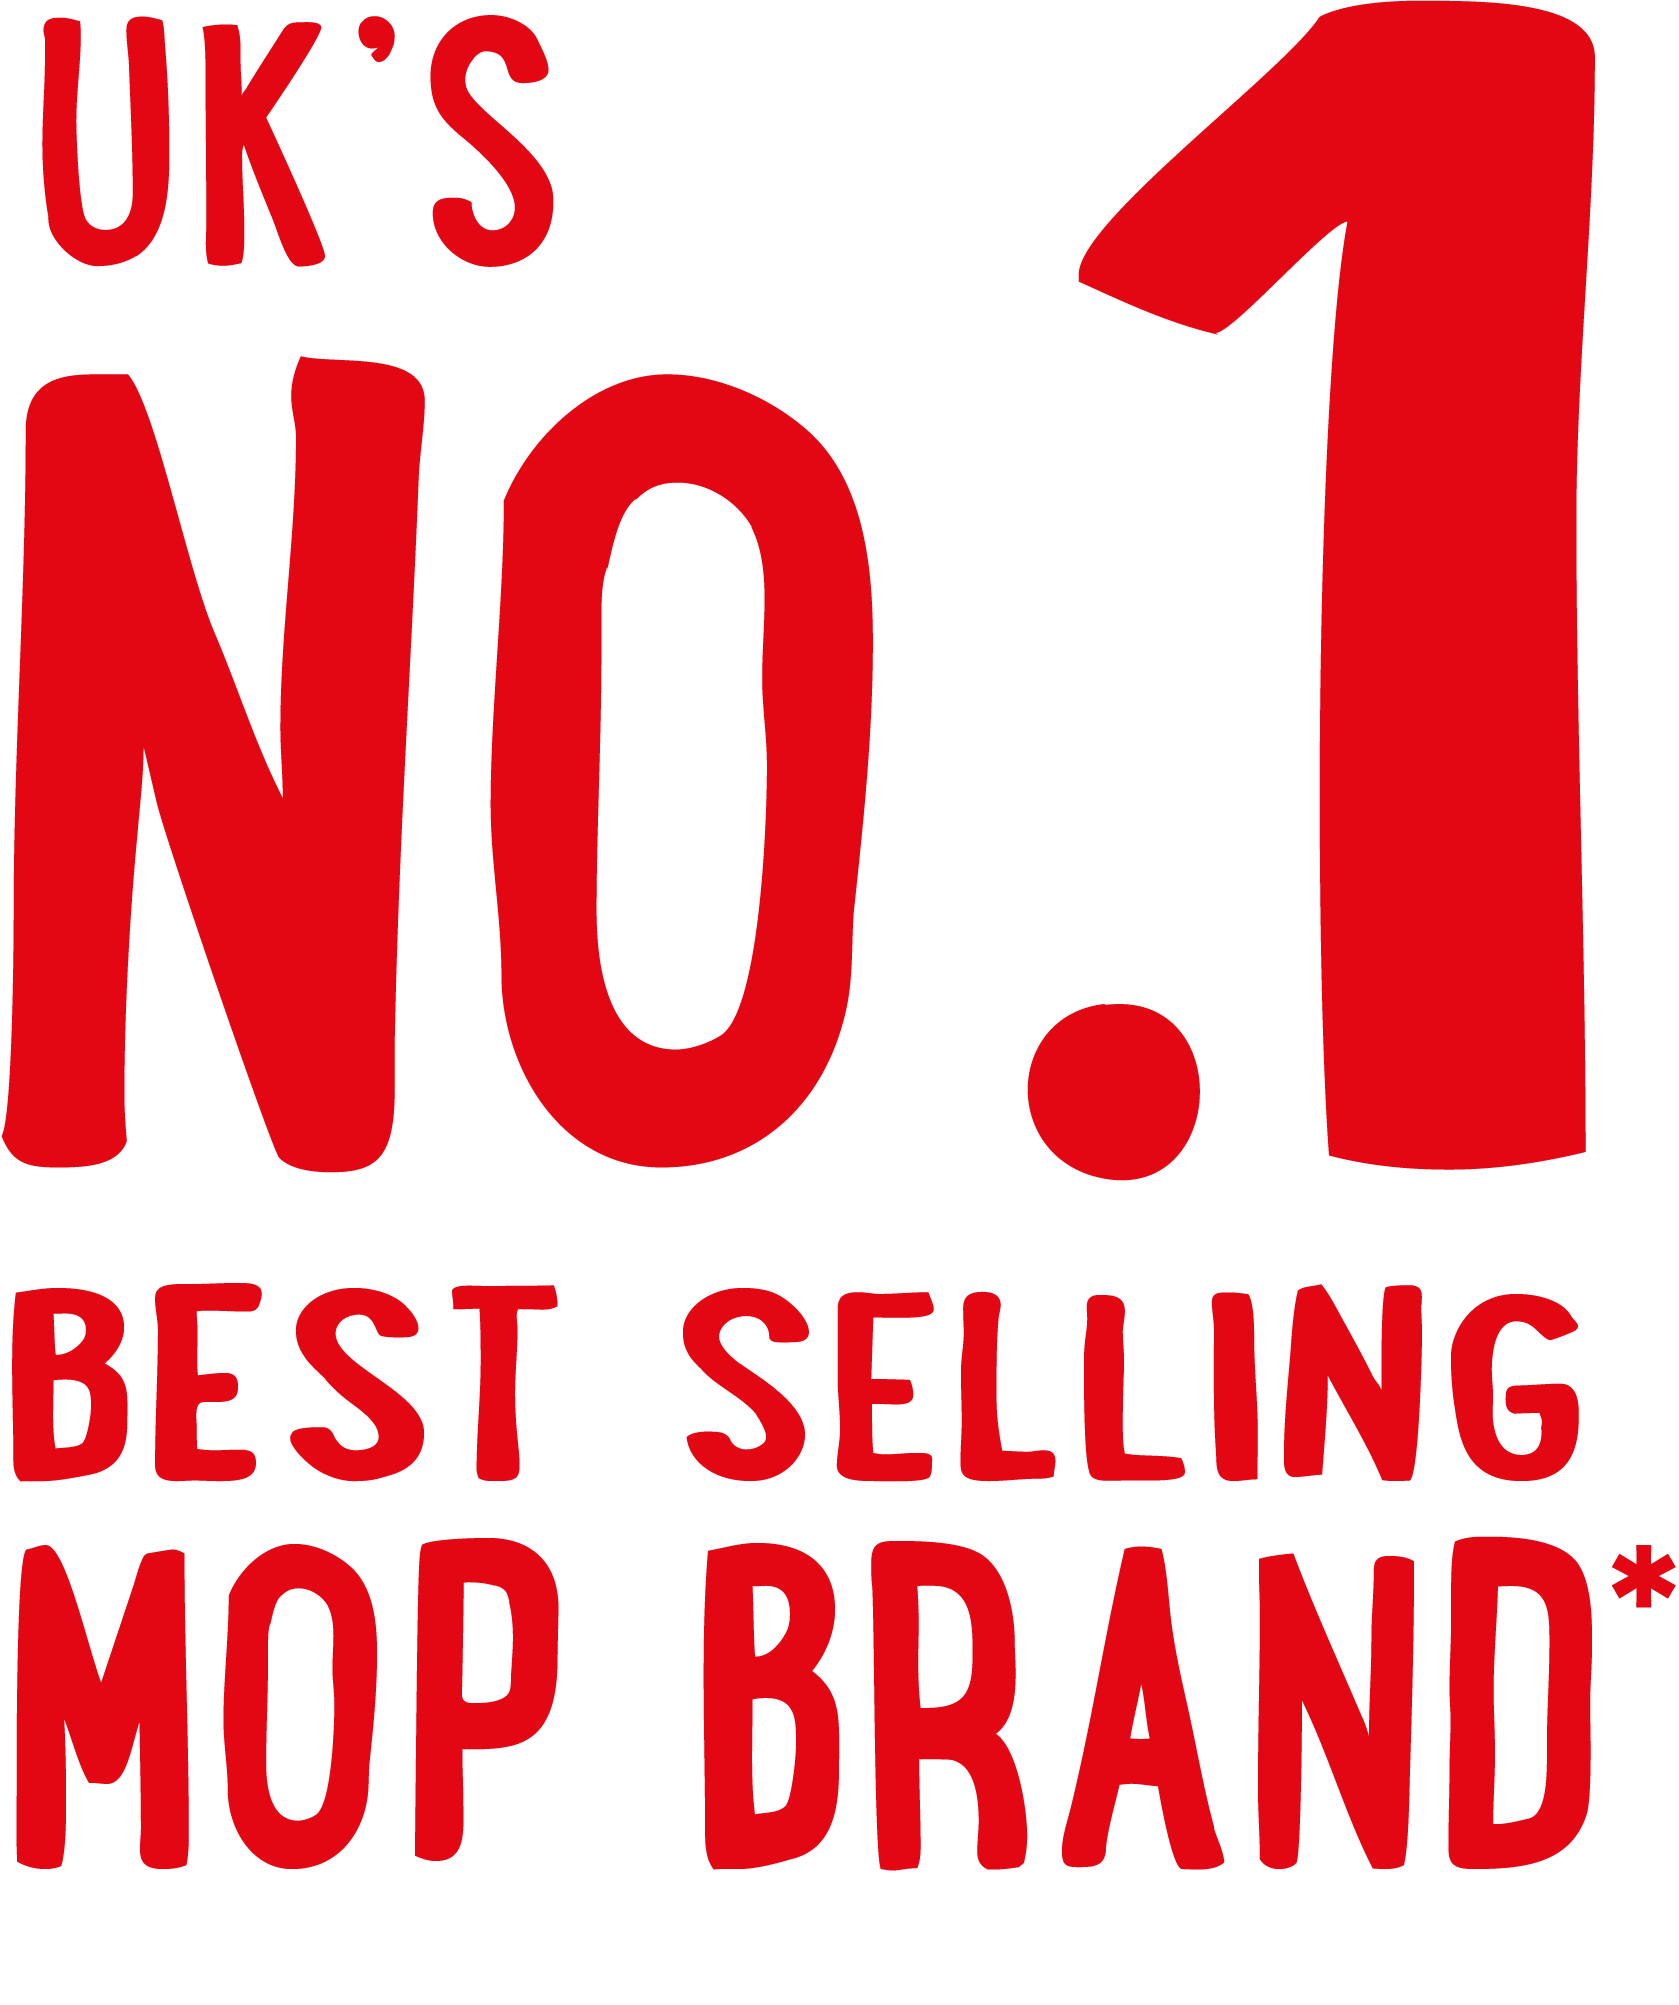 UKsNo1 Best Selling Mop Brand.png